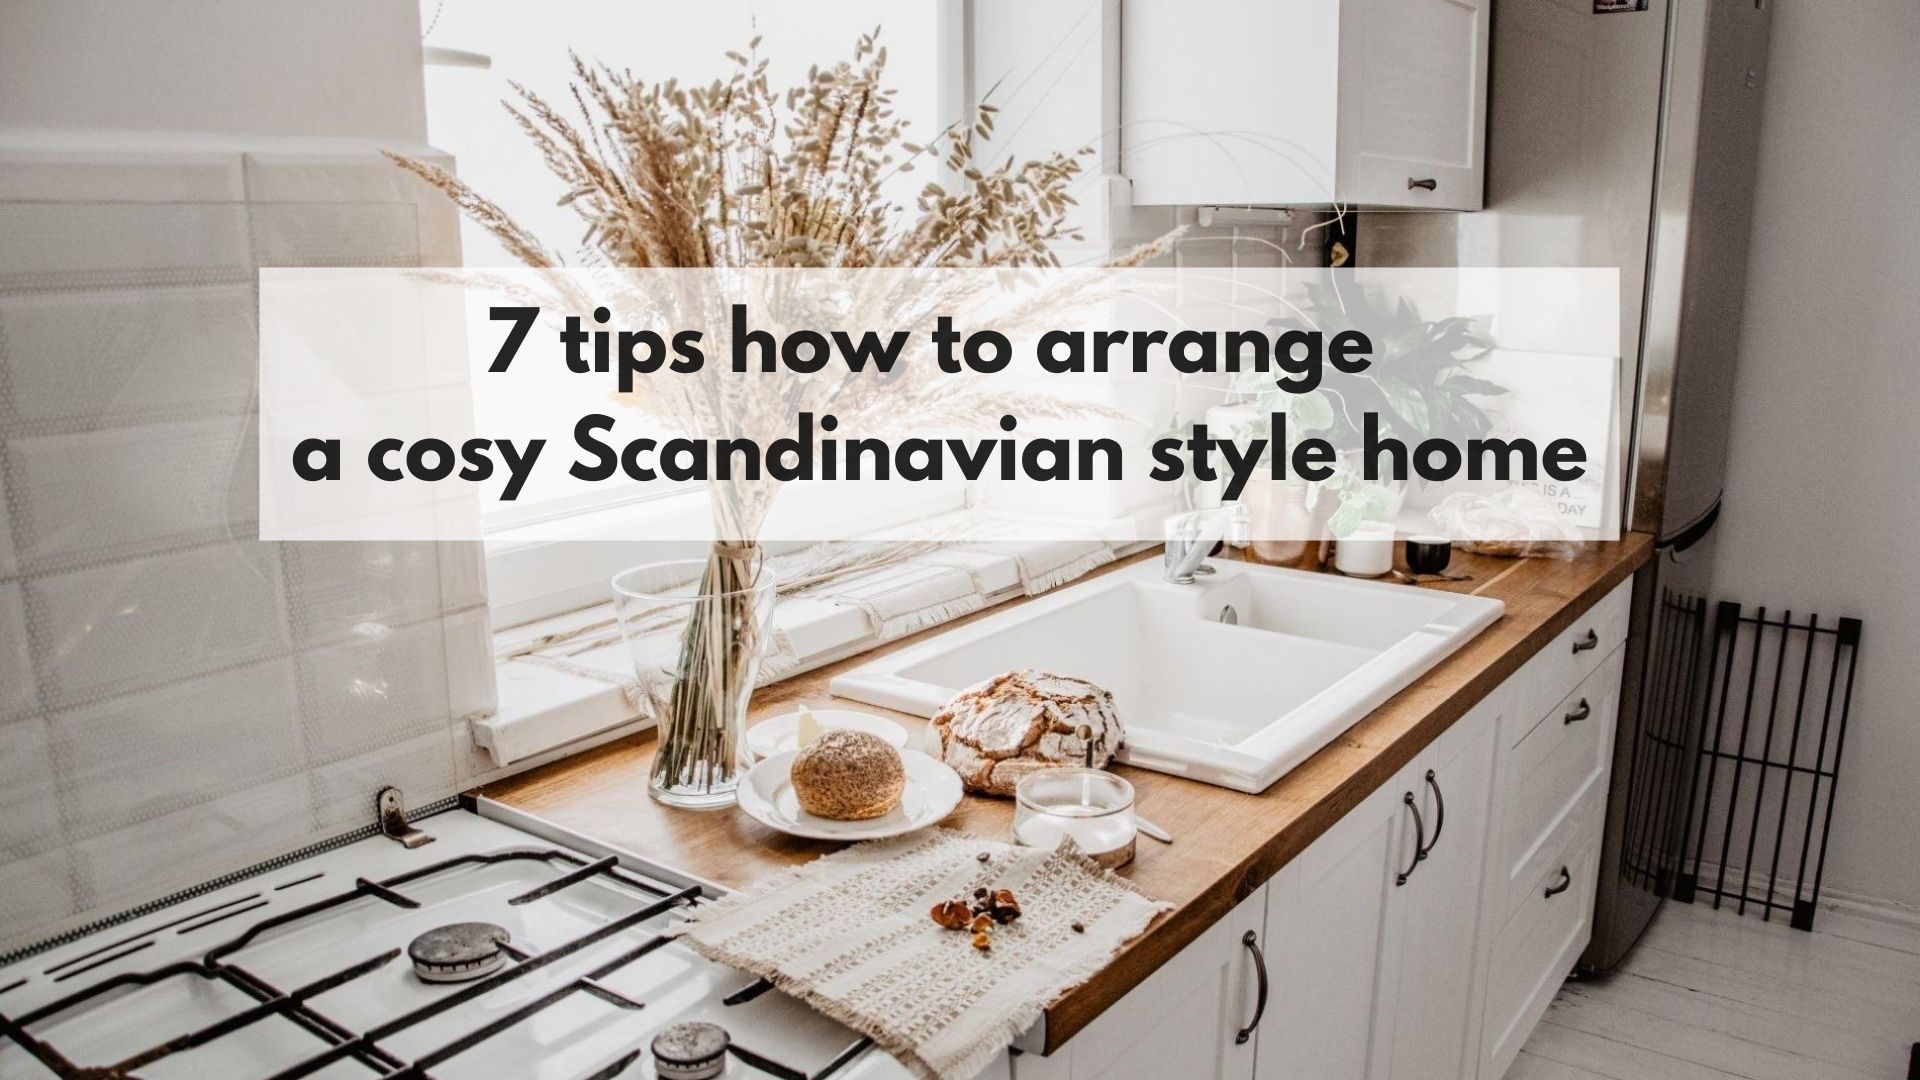 7 tips how to arrange a cosy Scandinavian style home_1